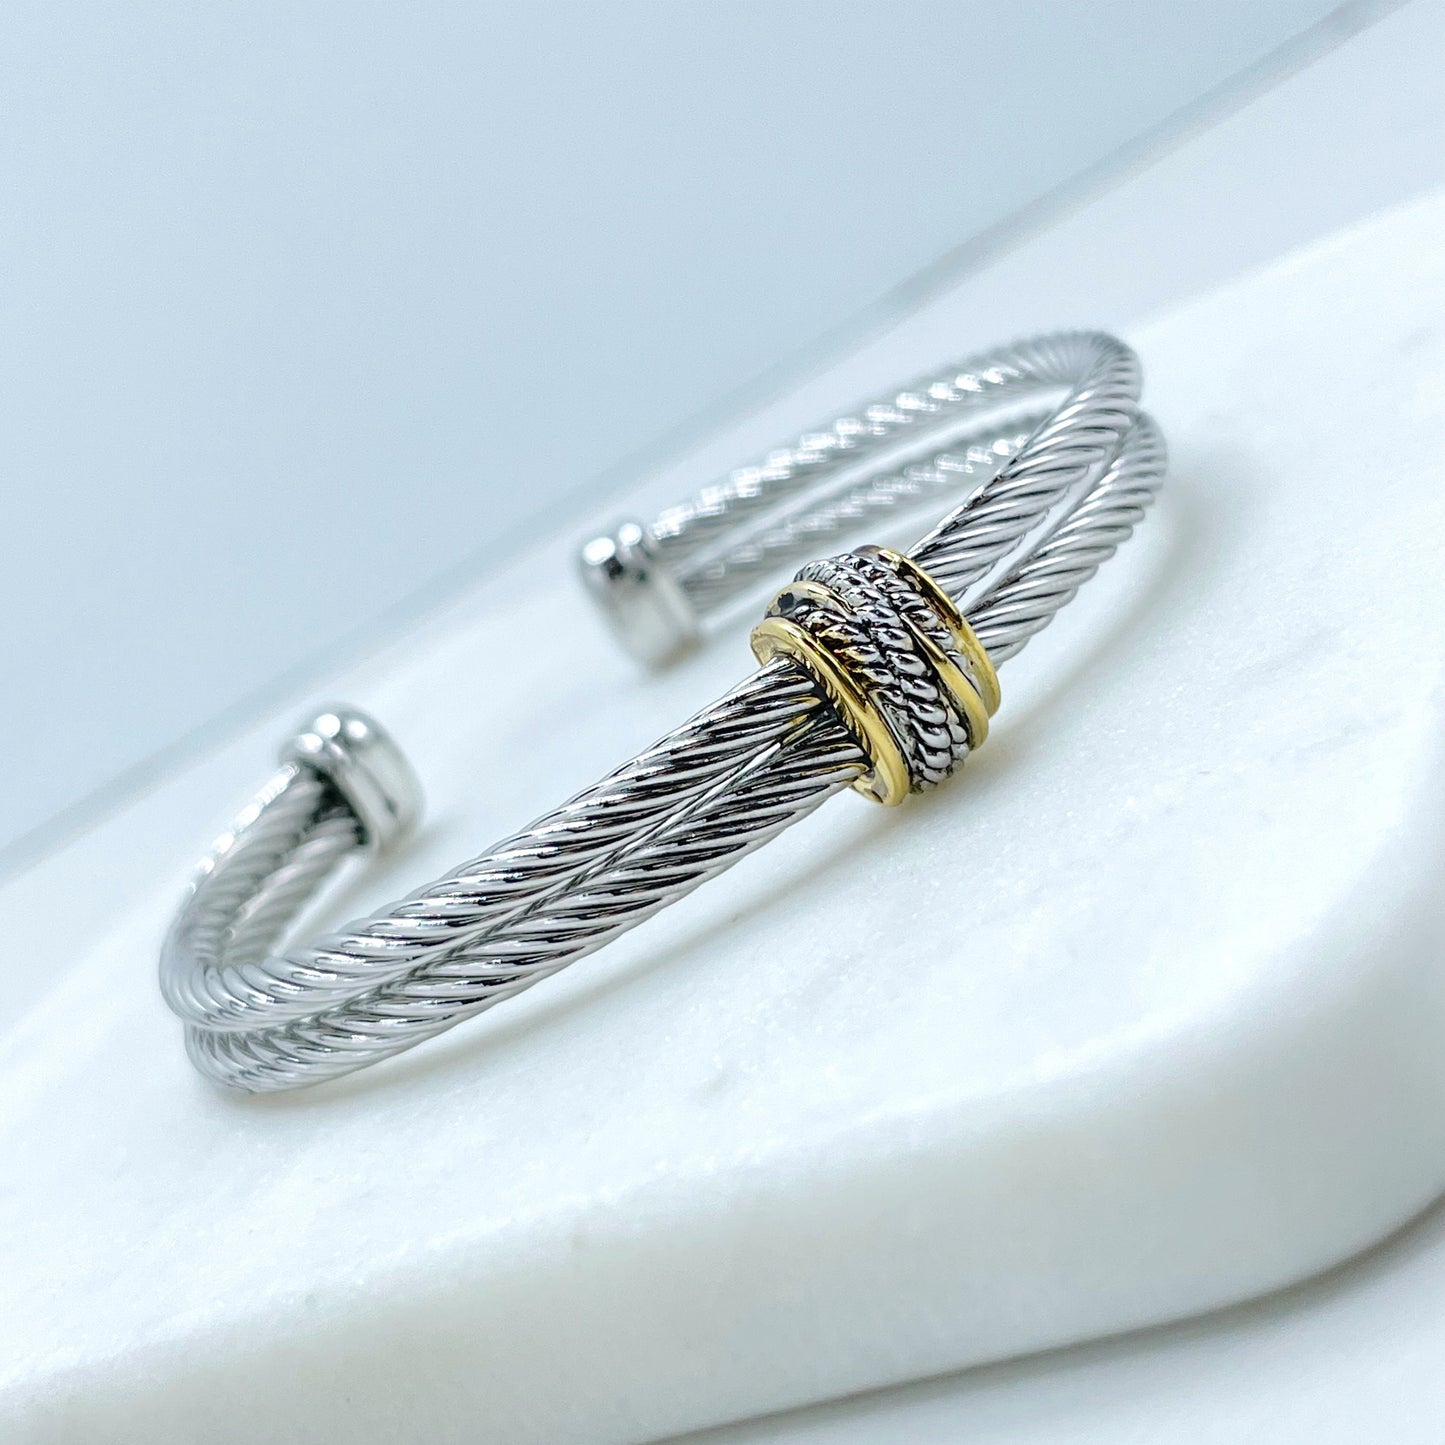 18k Silver Filled with Gold Filled Texturized Twisted Waves Cuff Bracelet Wholesale Jewelry Making Supplies